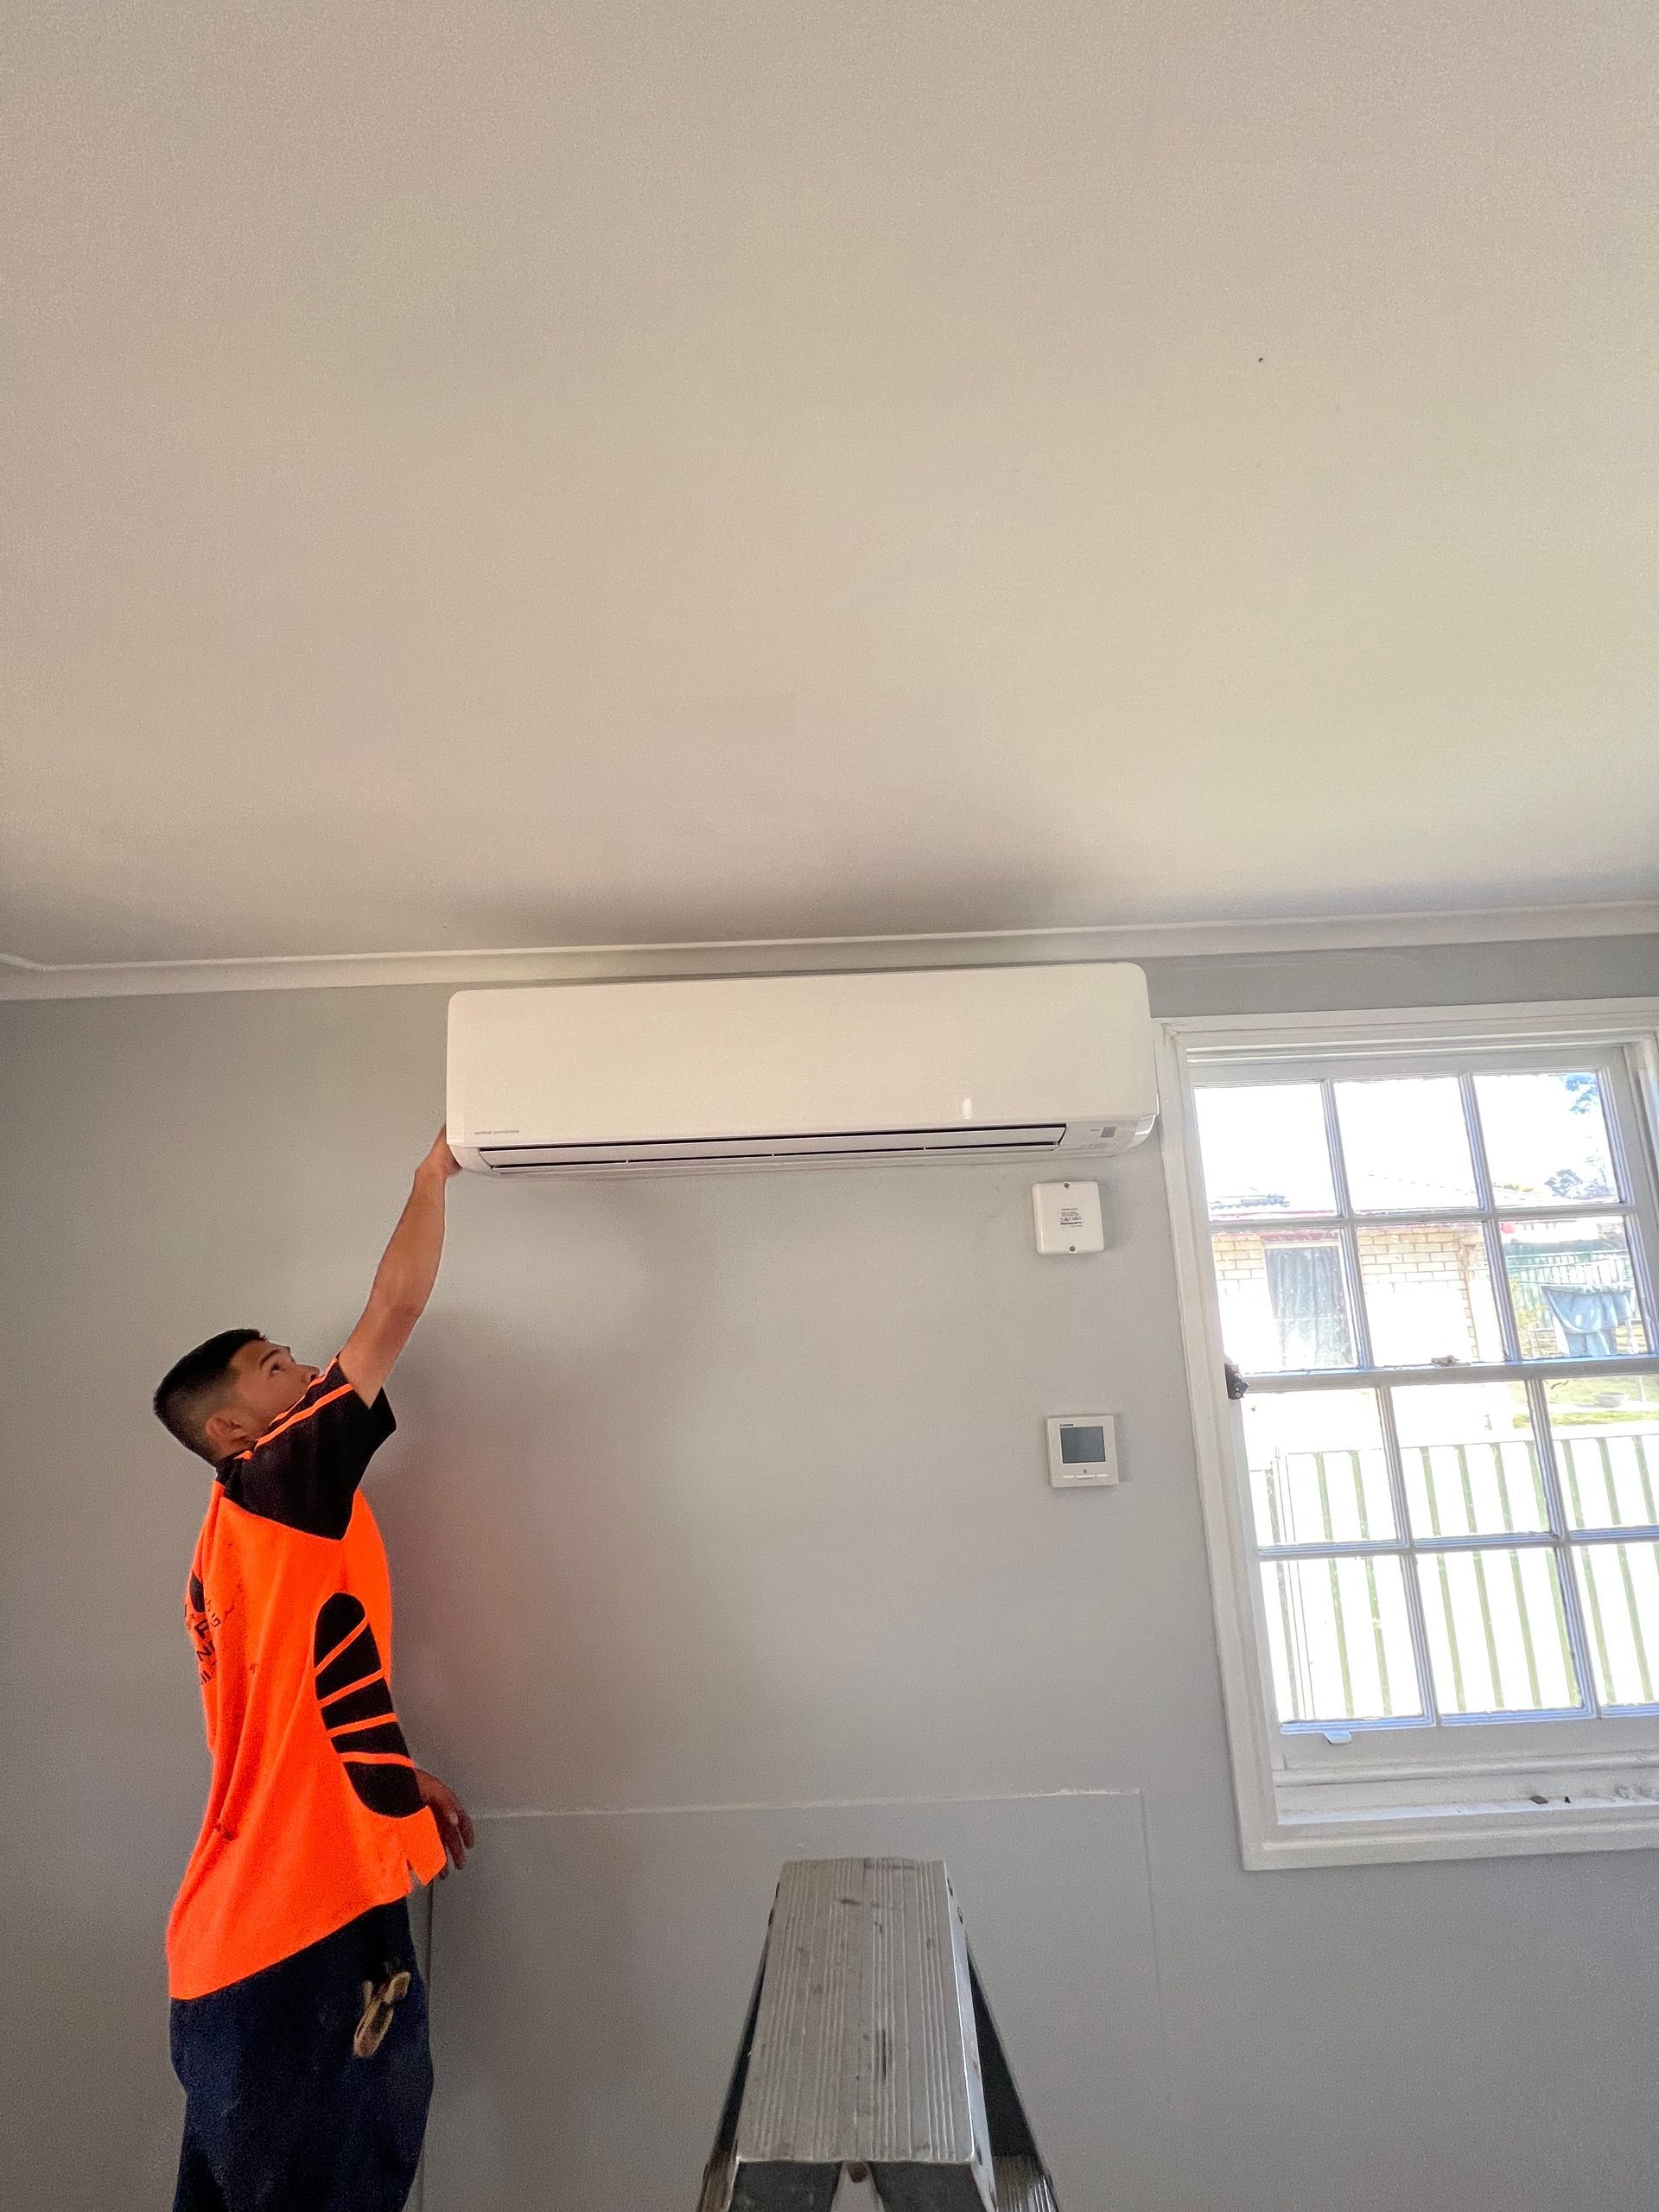 Air conditioning— JW Electrical in Wingham, NSW